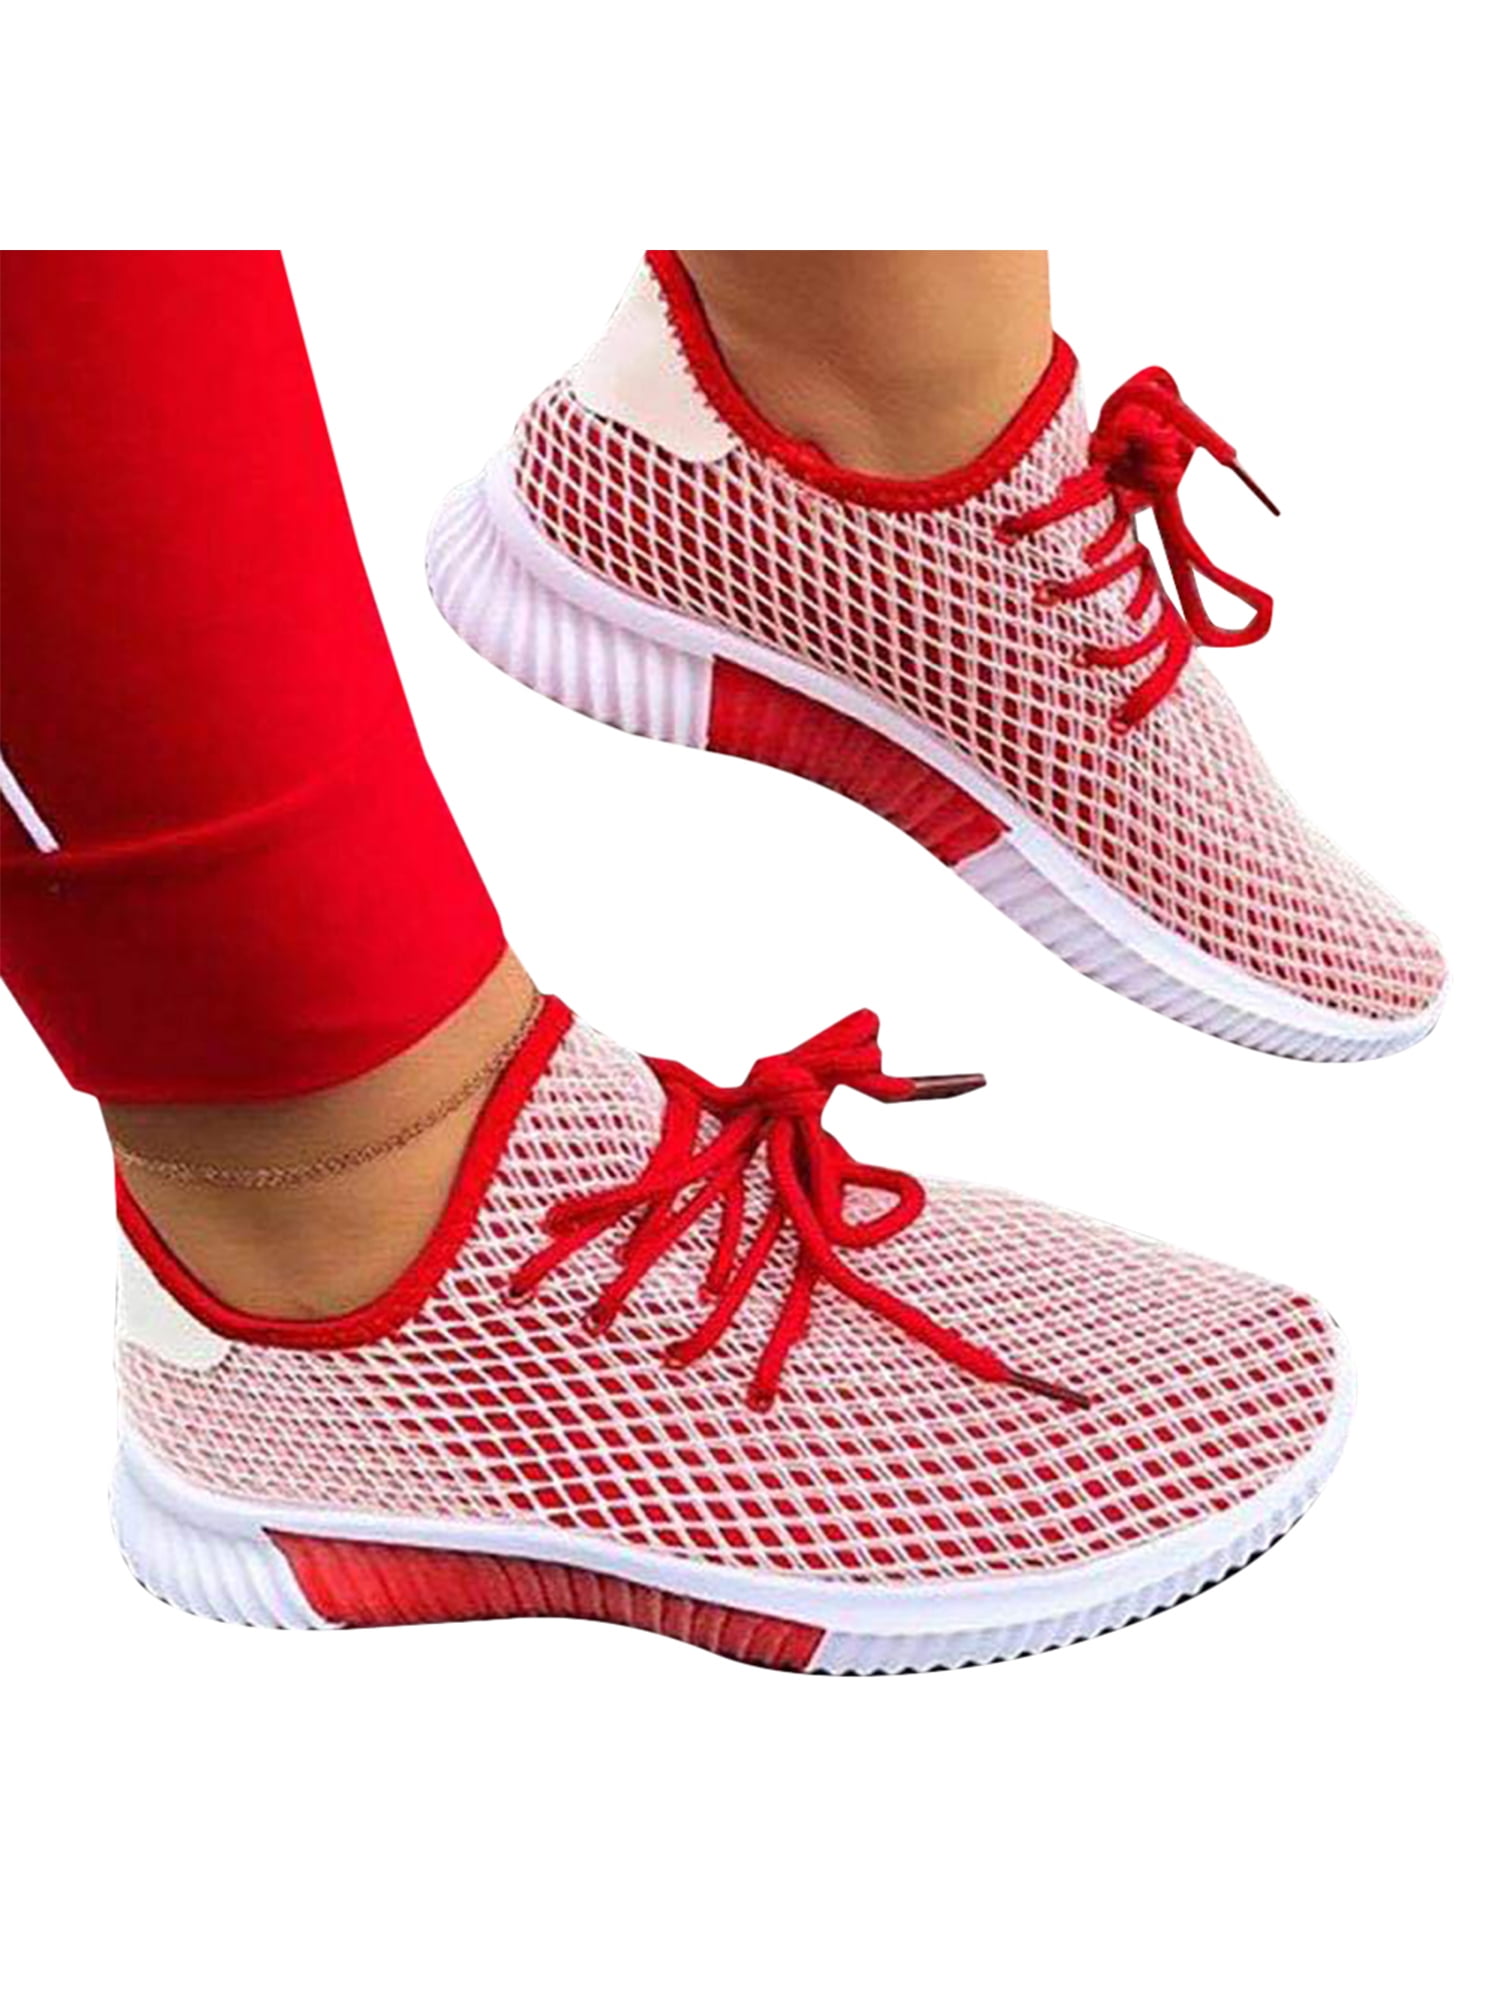 Ladies Women Chunky Lace Up Trainers Sports Running Comfy Platform Walking Shoes 